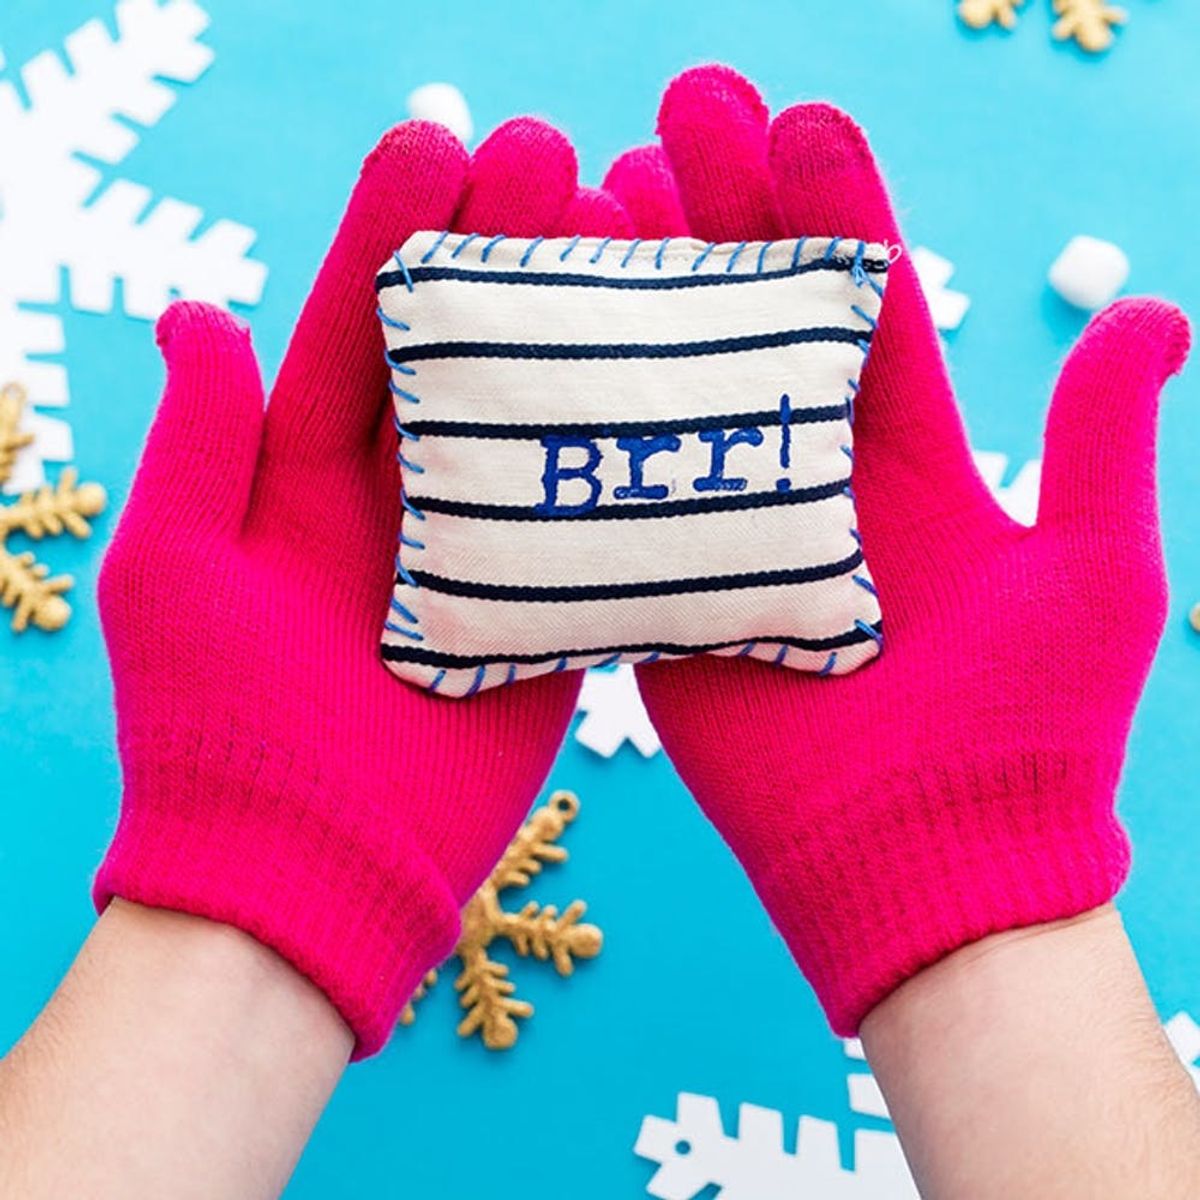 How to Make DIY Hand Warmers to Warm Up Your Little Paws